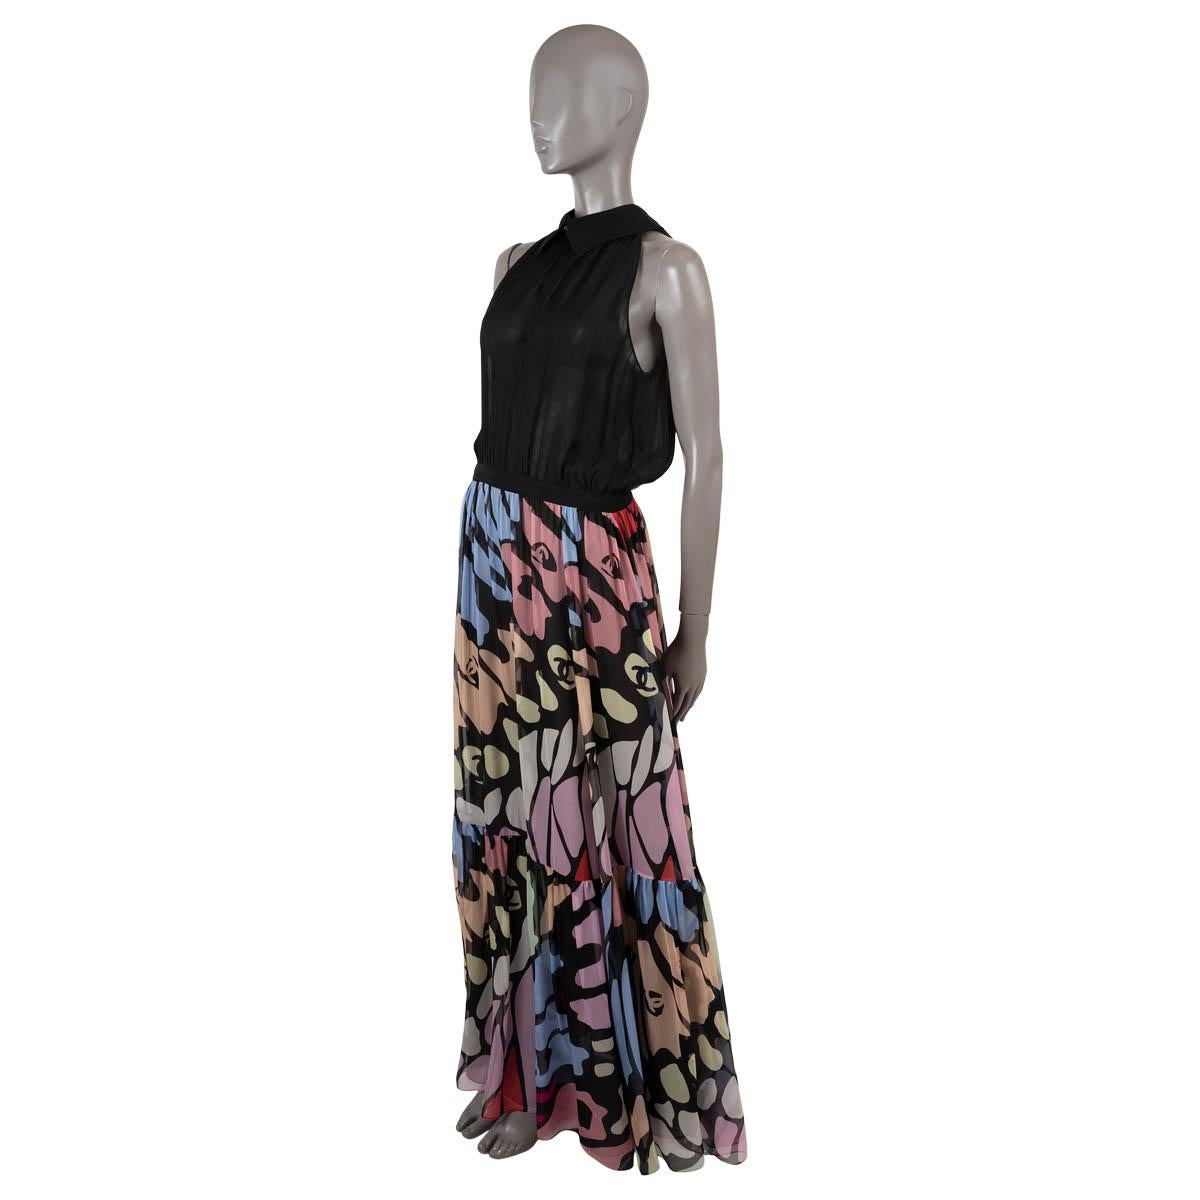 100% authentic Chanel floral maxi dress in black and multicolor silk chiffon (100%). Features semi-sheer top with collar and two decorative buttons on the front that opens with gold-tone CC buttons in the back and a floral chiffon skirt thats opens